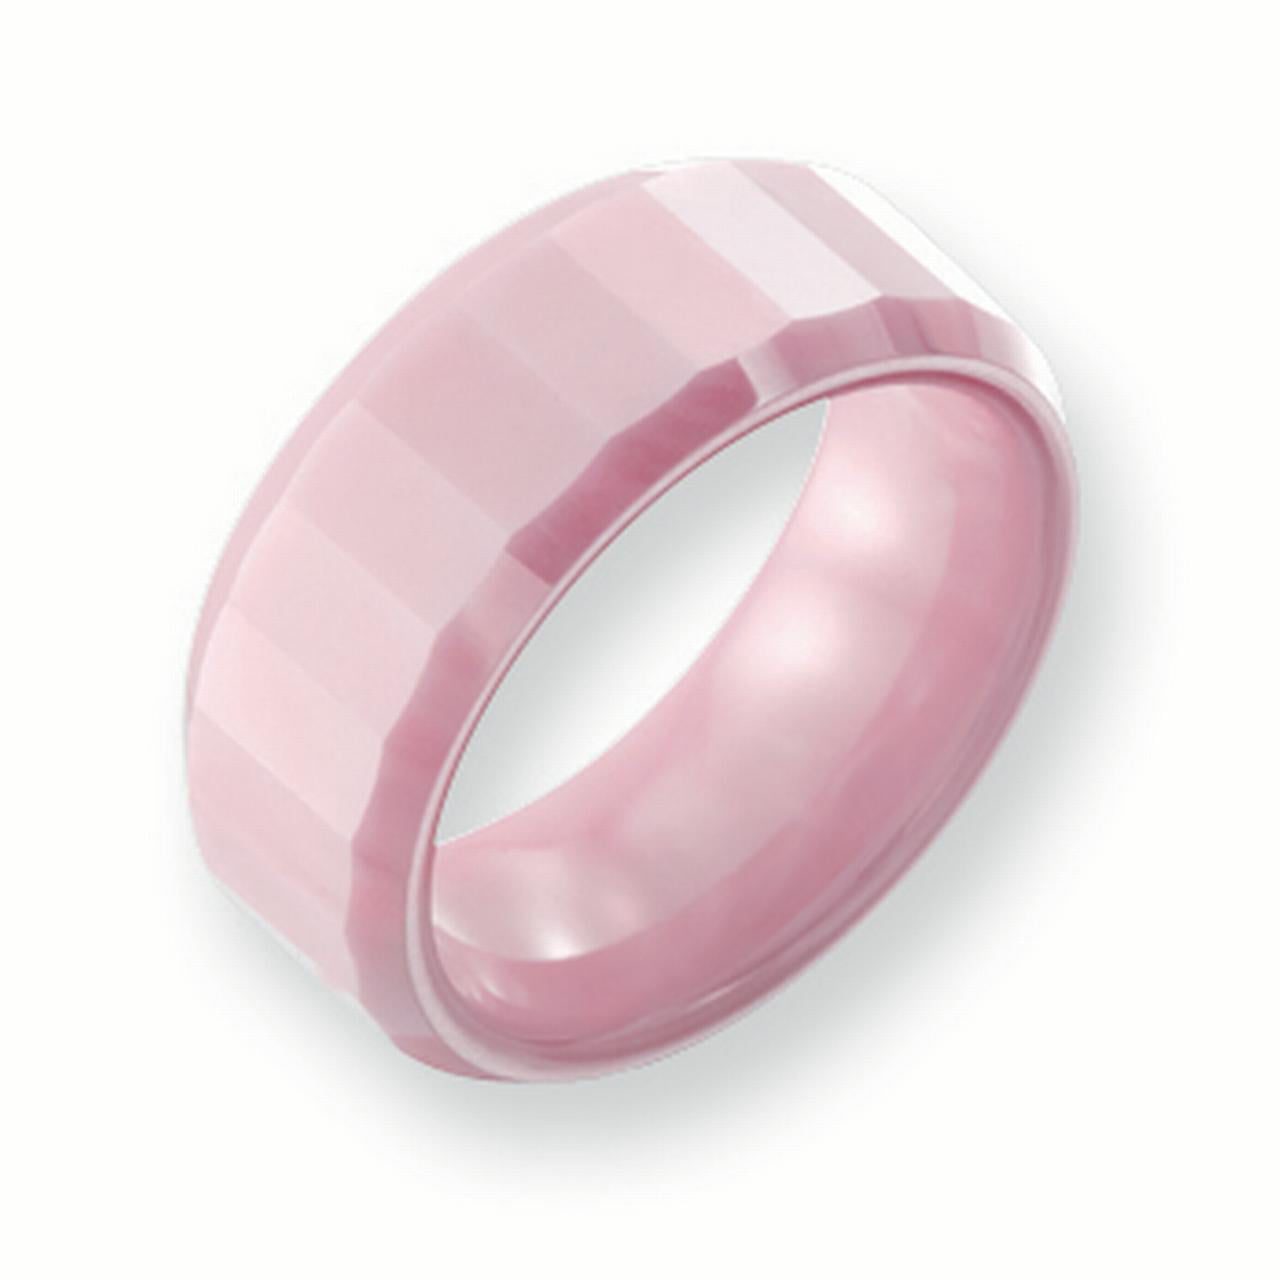 Wedding Bands Classic Bands Faceted Domed Bands Ceramic Pink Faceted 8mm Polished Band Size 5